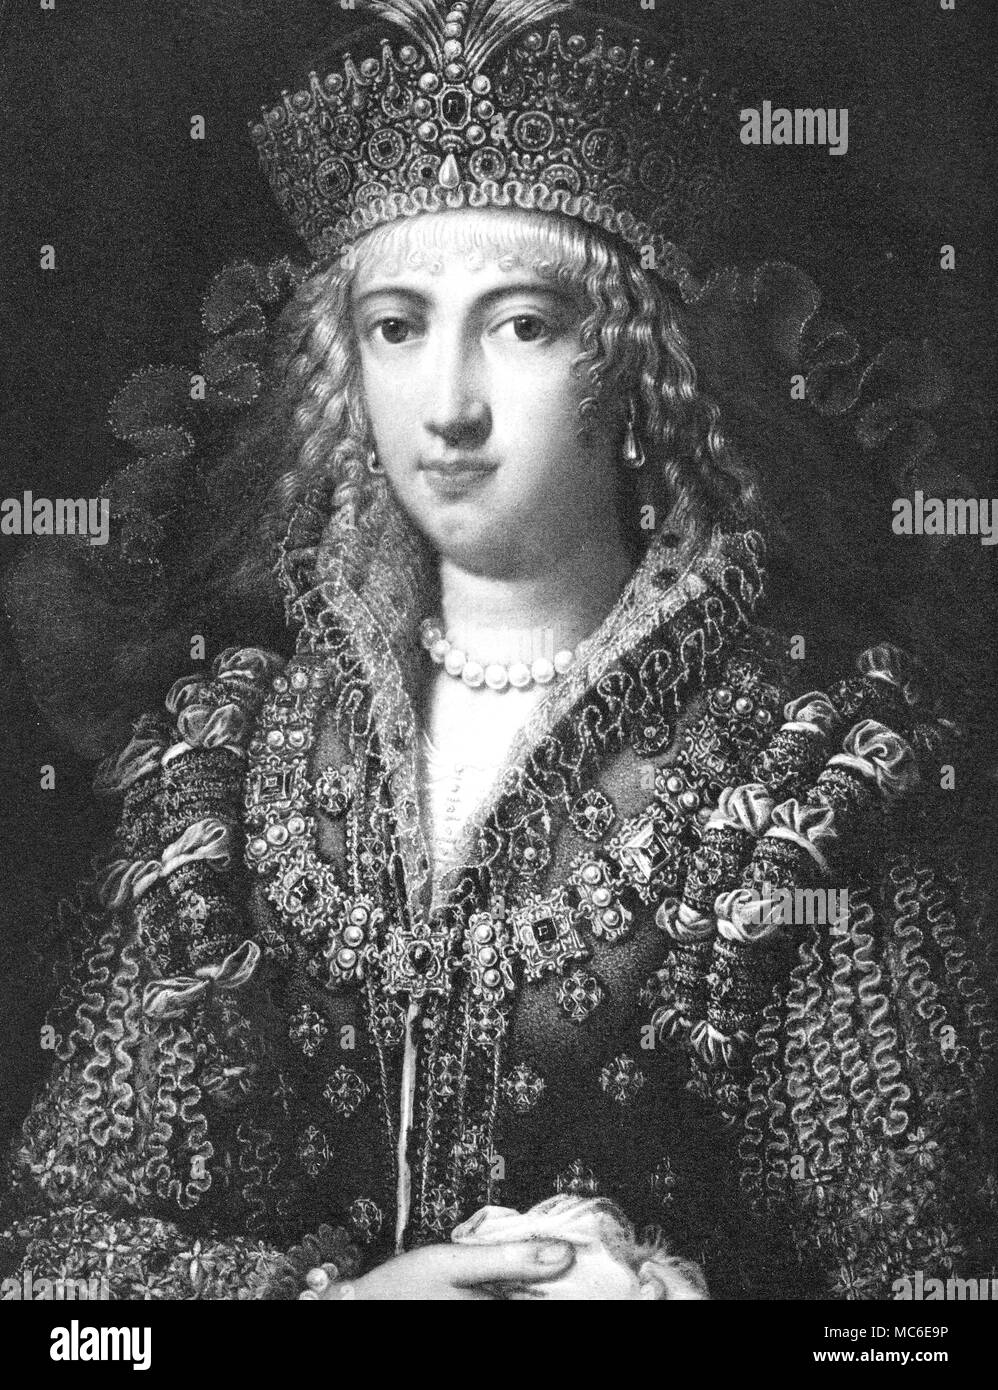 NOSTRADAMUS - CATHERINA DEI MEDICI Nineteenth-century Mezzotint engraving of the Portrait of Catherine de' Medici at the Age of Twenty-One, from Poggio a Caiano. Catherine was an ardent fan of Nostradamus, and commissioned him to cast the horoscopes of her children - the future rulers of France. During her progress through France, she called on Nostradamus at Salon, in Provence. He set out the bleak destinies of Catherine, and of her brood, in his collection of prophecies. Stock Photo